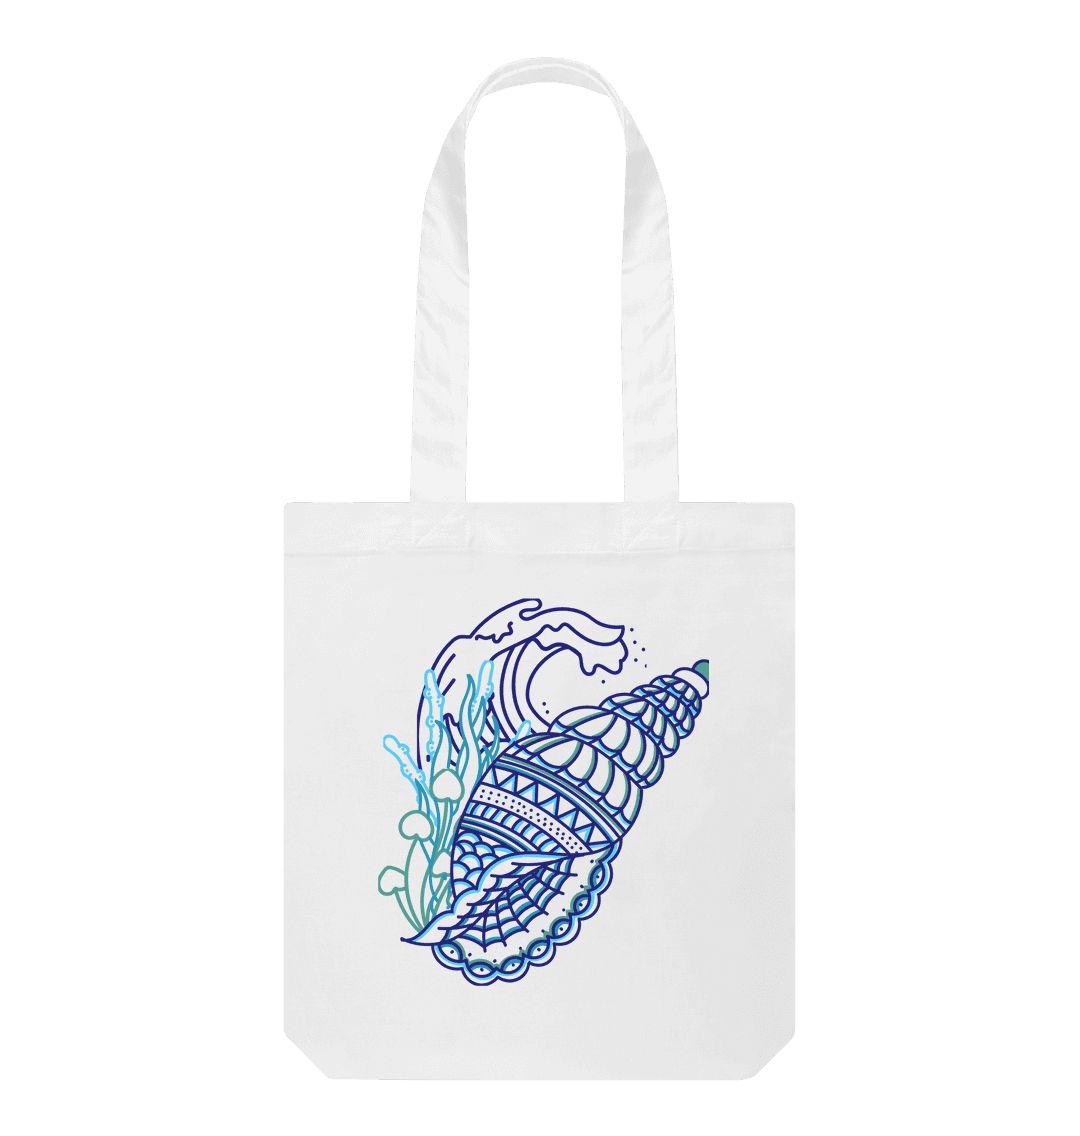 Blue shell tote bag to carry all the essentials